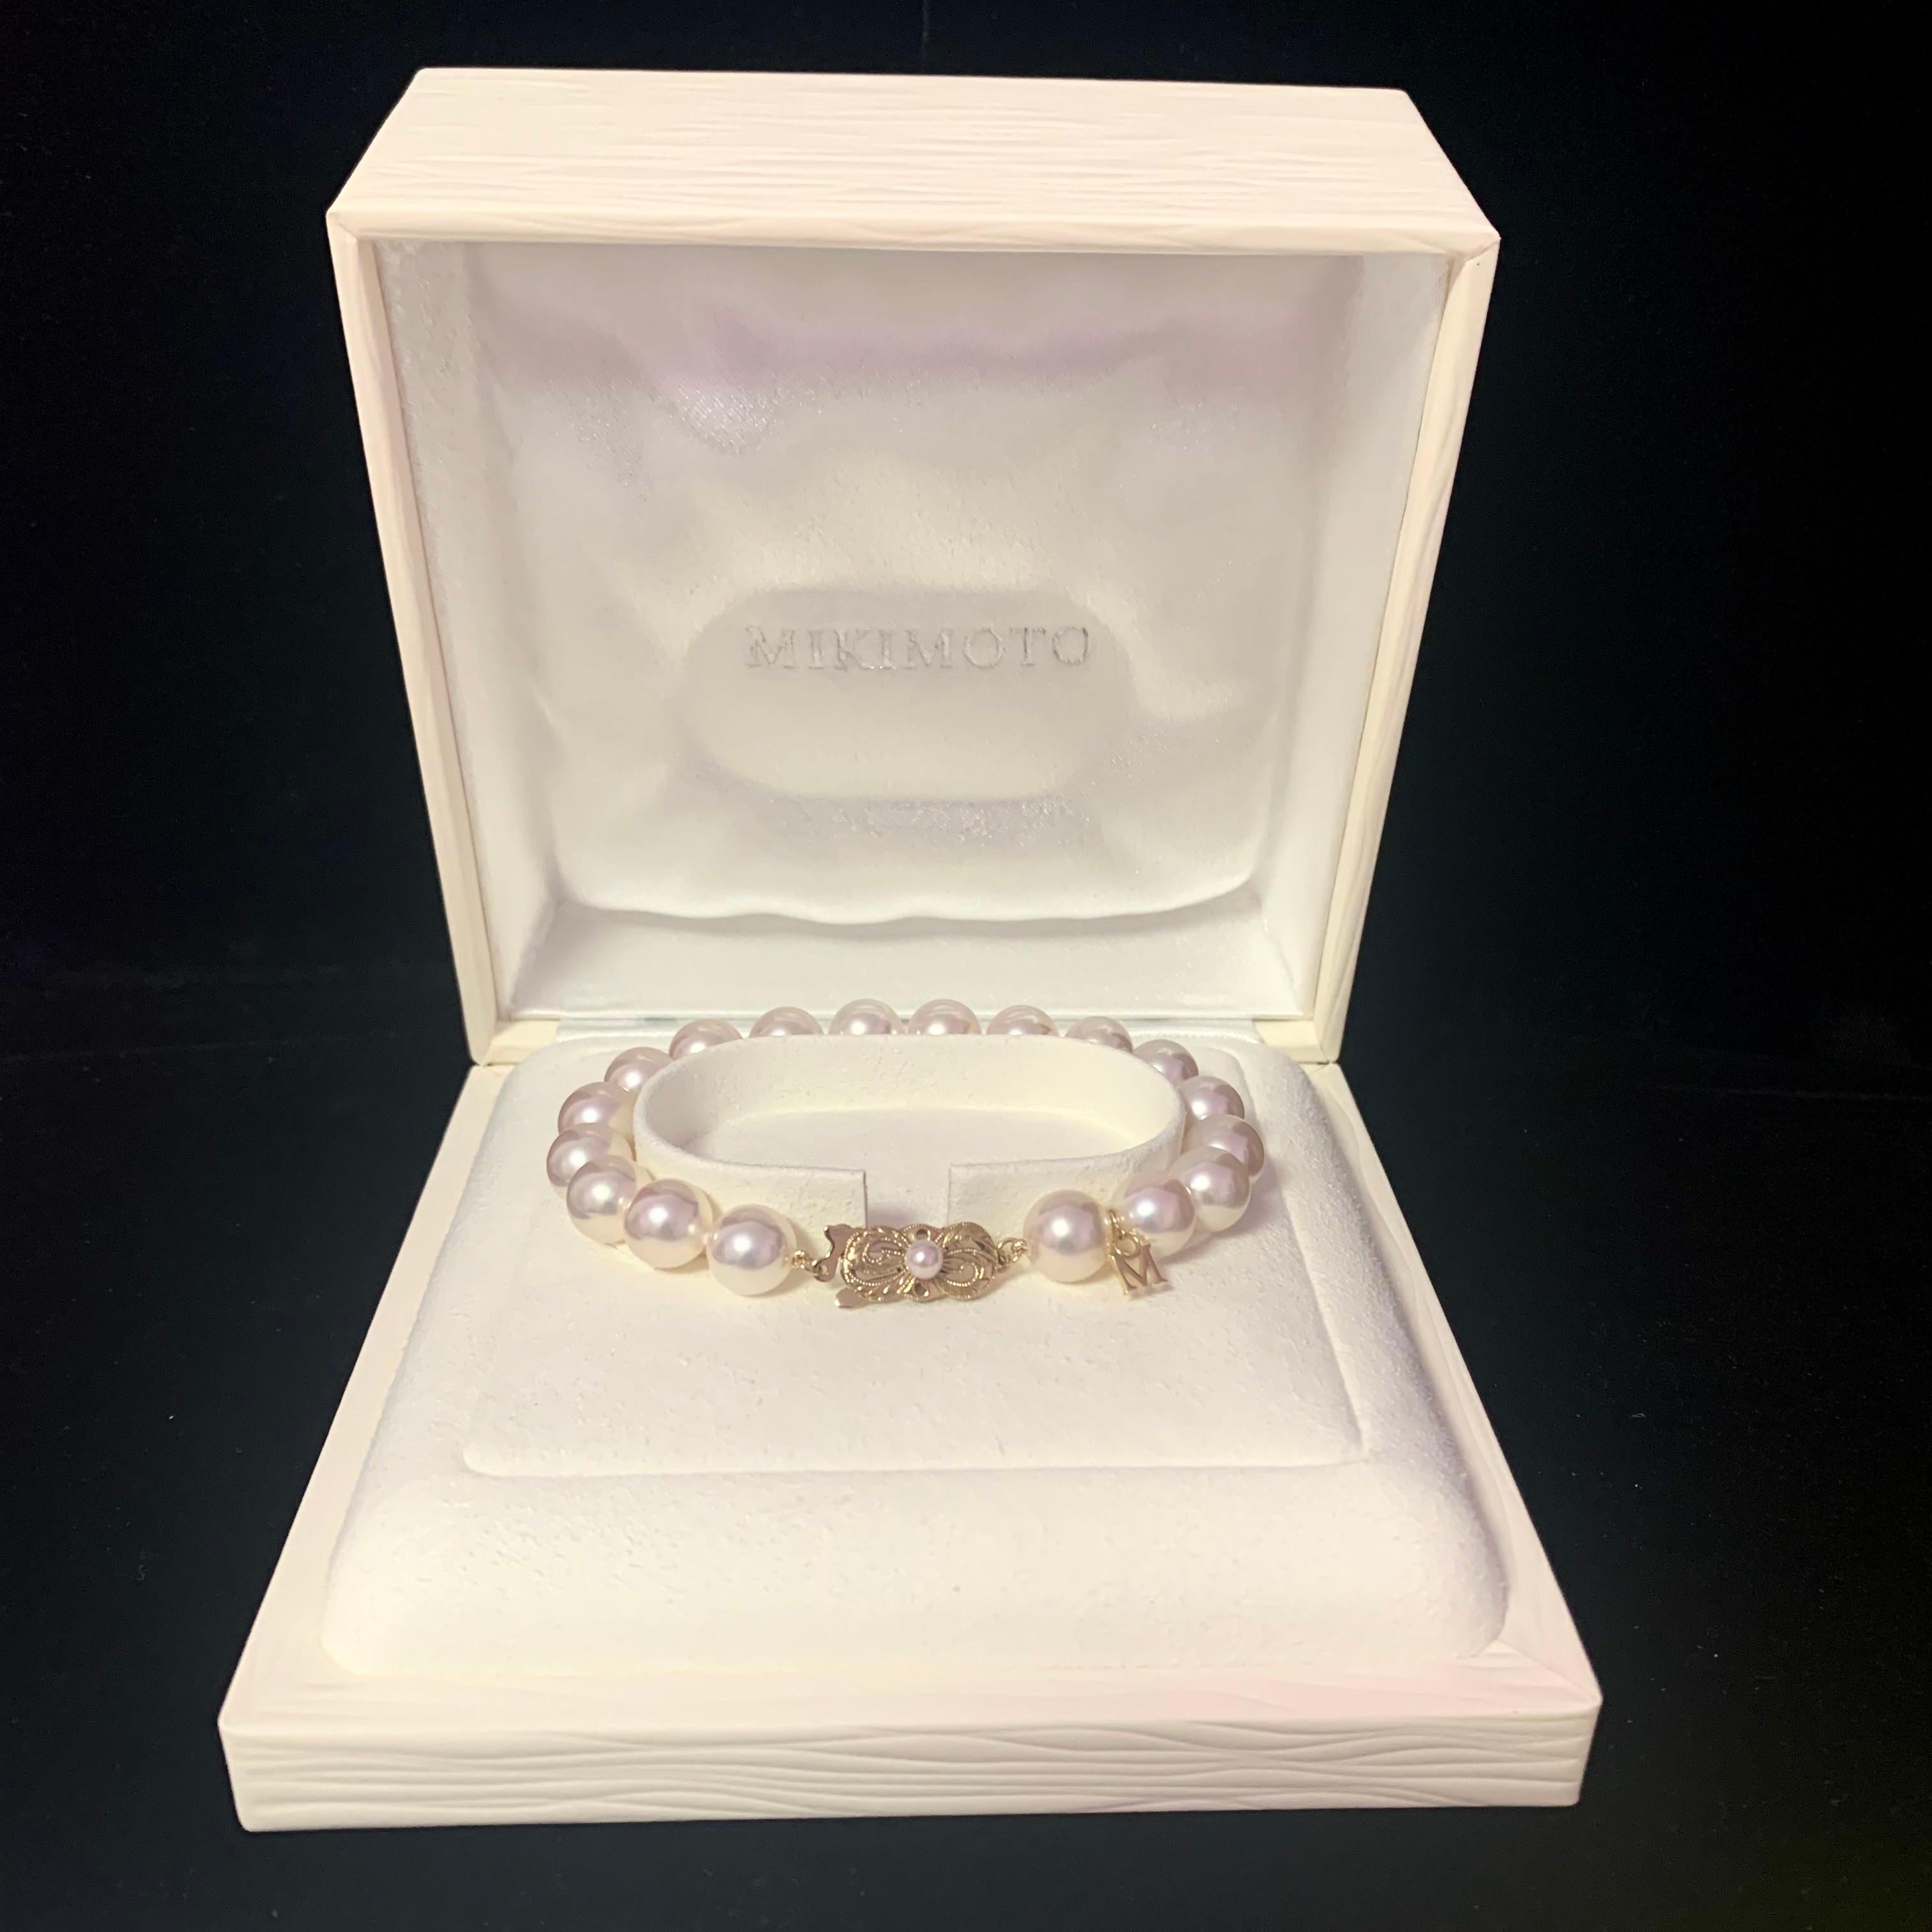 Mikimoto Estate Akoya Pearl Bracelet 18k Gold 9.5 mm Certified $12,975 114989

This is a Unique Custom Made Glamorous Piece of Jewelry!

Nothing says, “I Love you” more than Diamonds and Pearls!

This Mikimoto bracelet has been Certified, Inspected,